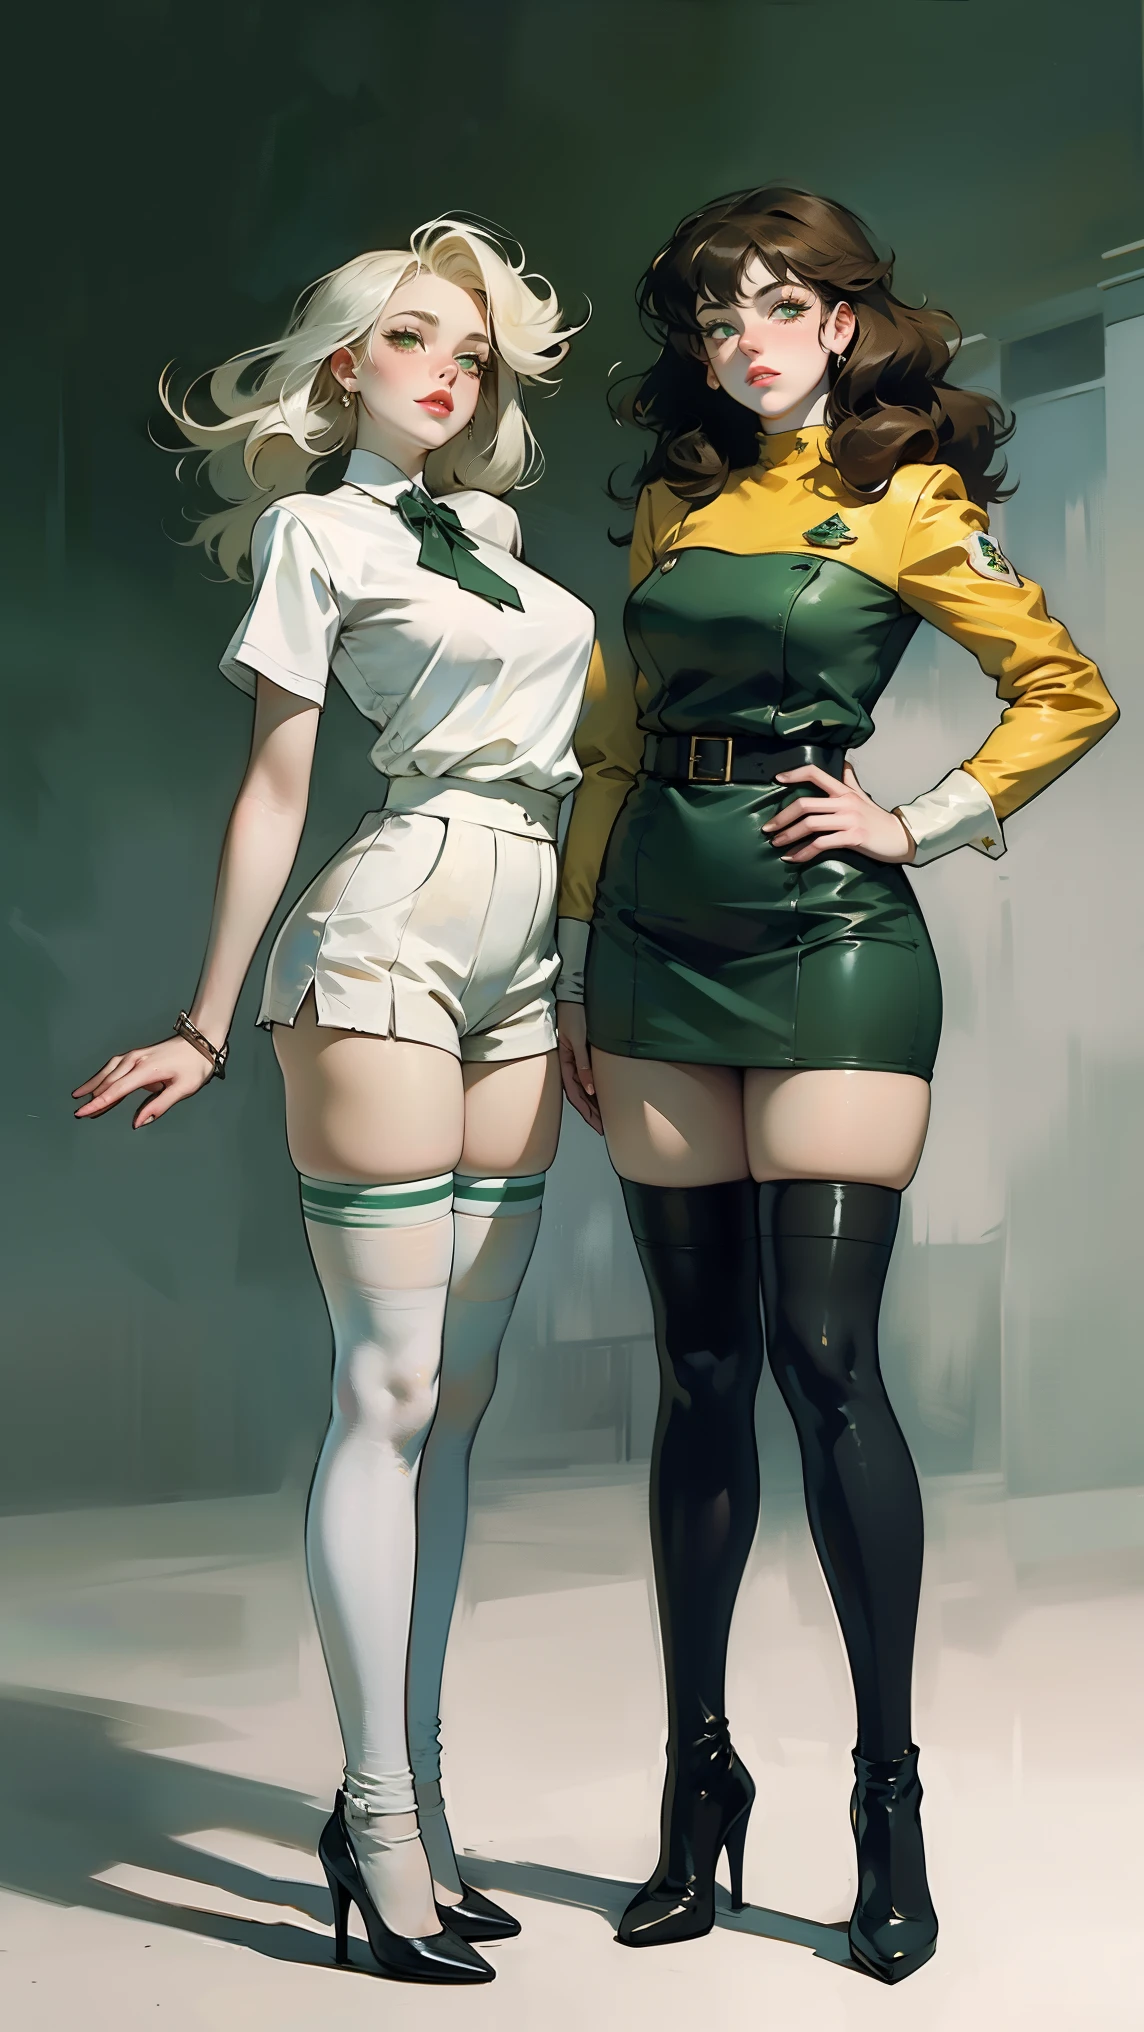 (((full body photo))) ((Masterpiece, highres)), 2girls, duo, twins, ((one brown haired girl, one blonde girl)), long hair, curly hair, matching hairstyles, different hair color, confident, elegant, (((matching outfits, matching uniforms, green uniforms, white thighhighs, long white socks, black high heels))), standing at attention, shoulder to shoulder, same pose, mansion, RETRO ARTSTYLE, 1990S (STYLE)